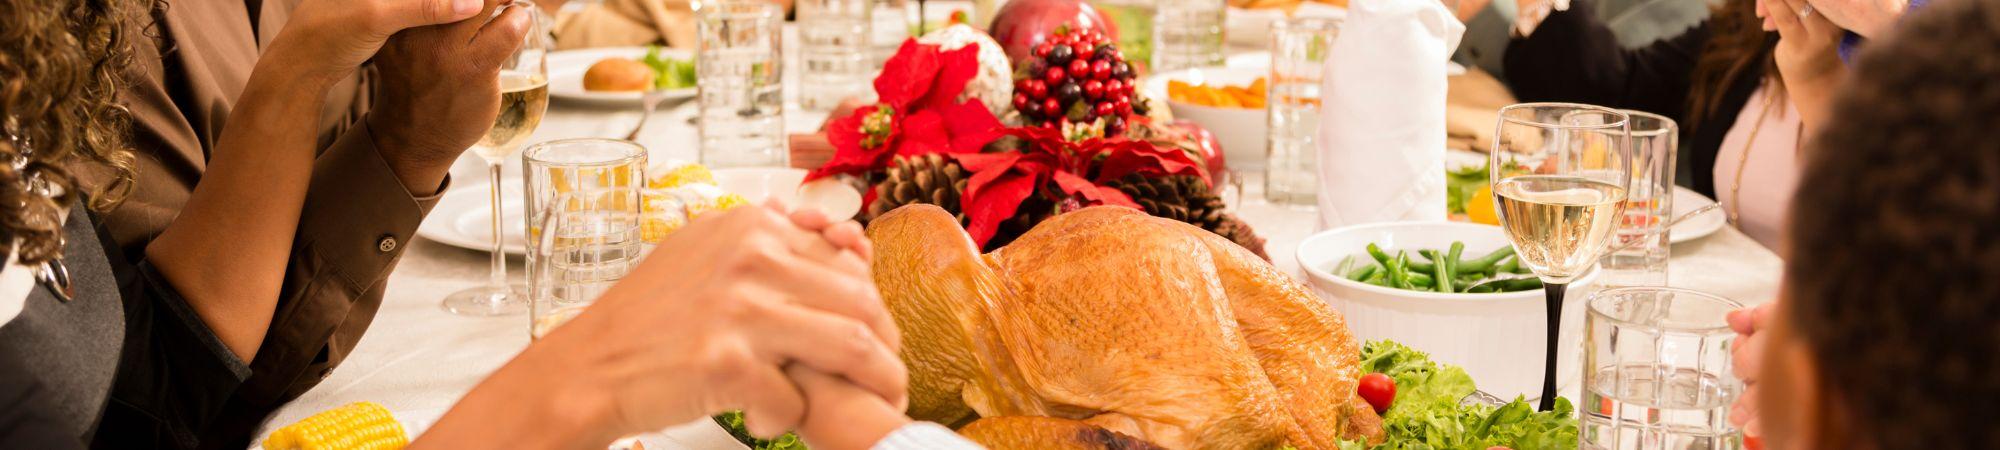 Tips, Resources, and Recipes For Mindful Holiday Feasting!